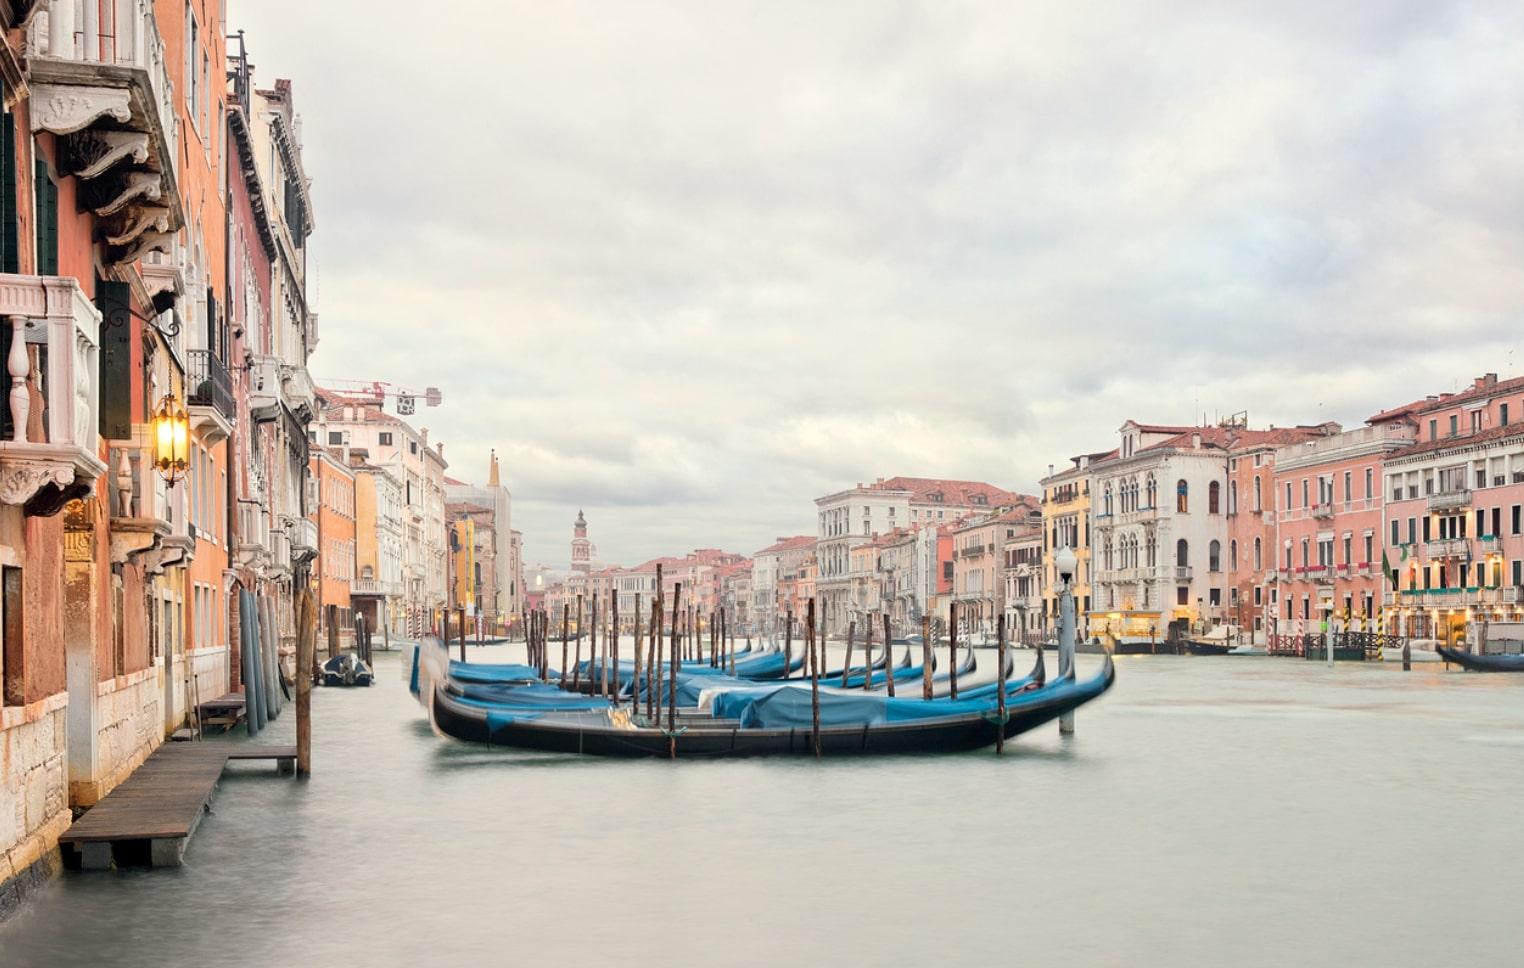 Title: Grand Canal, Venice, Italy

All available sizes & editions for each size of this photograph:
13” x 21" Edition of 4
21” x 35" Edition of 4
32” x 53” Edition of 7
44" x 73" Edition of 10

While the spaces themselves are ornate and traditional,